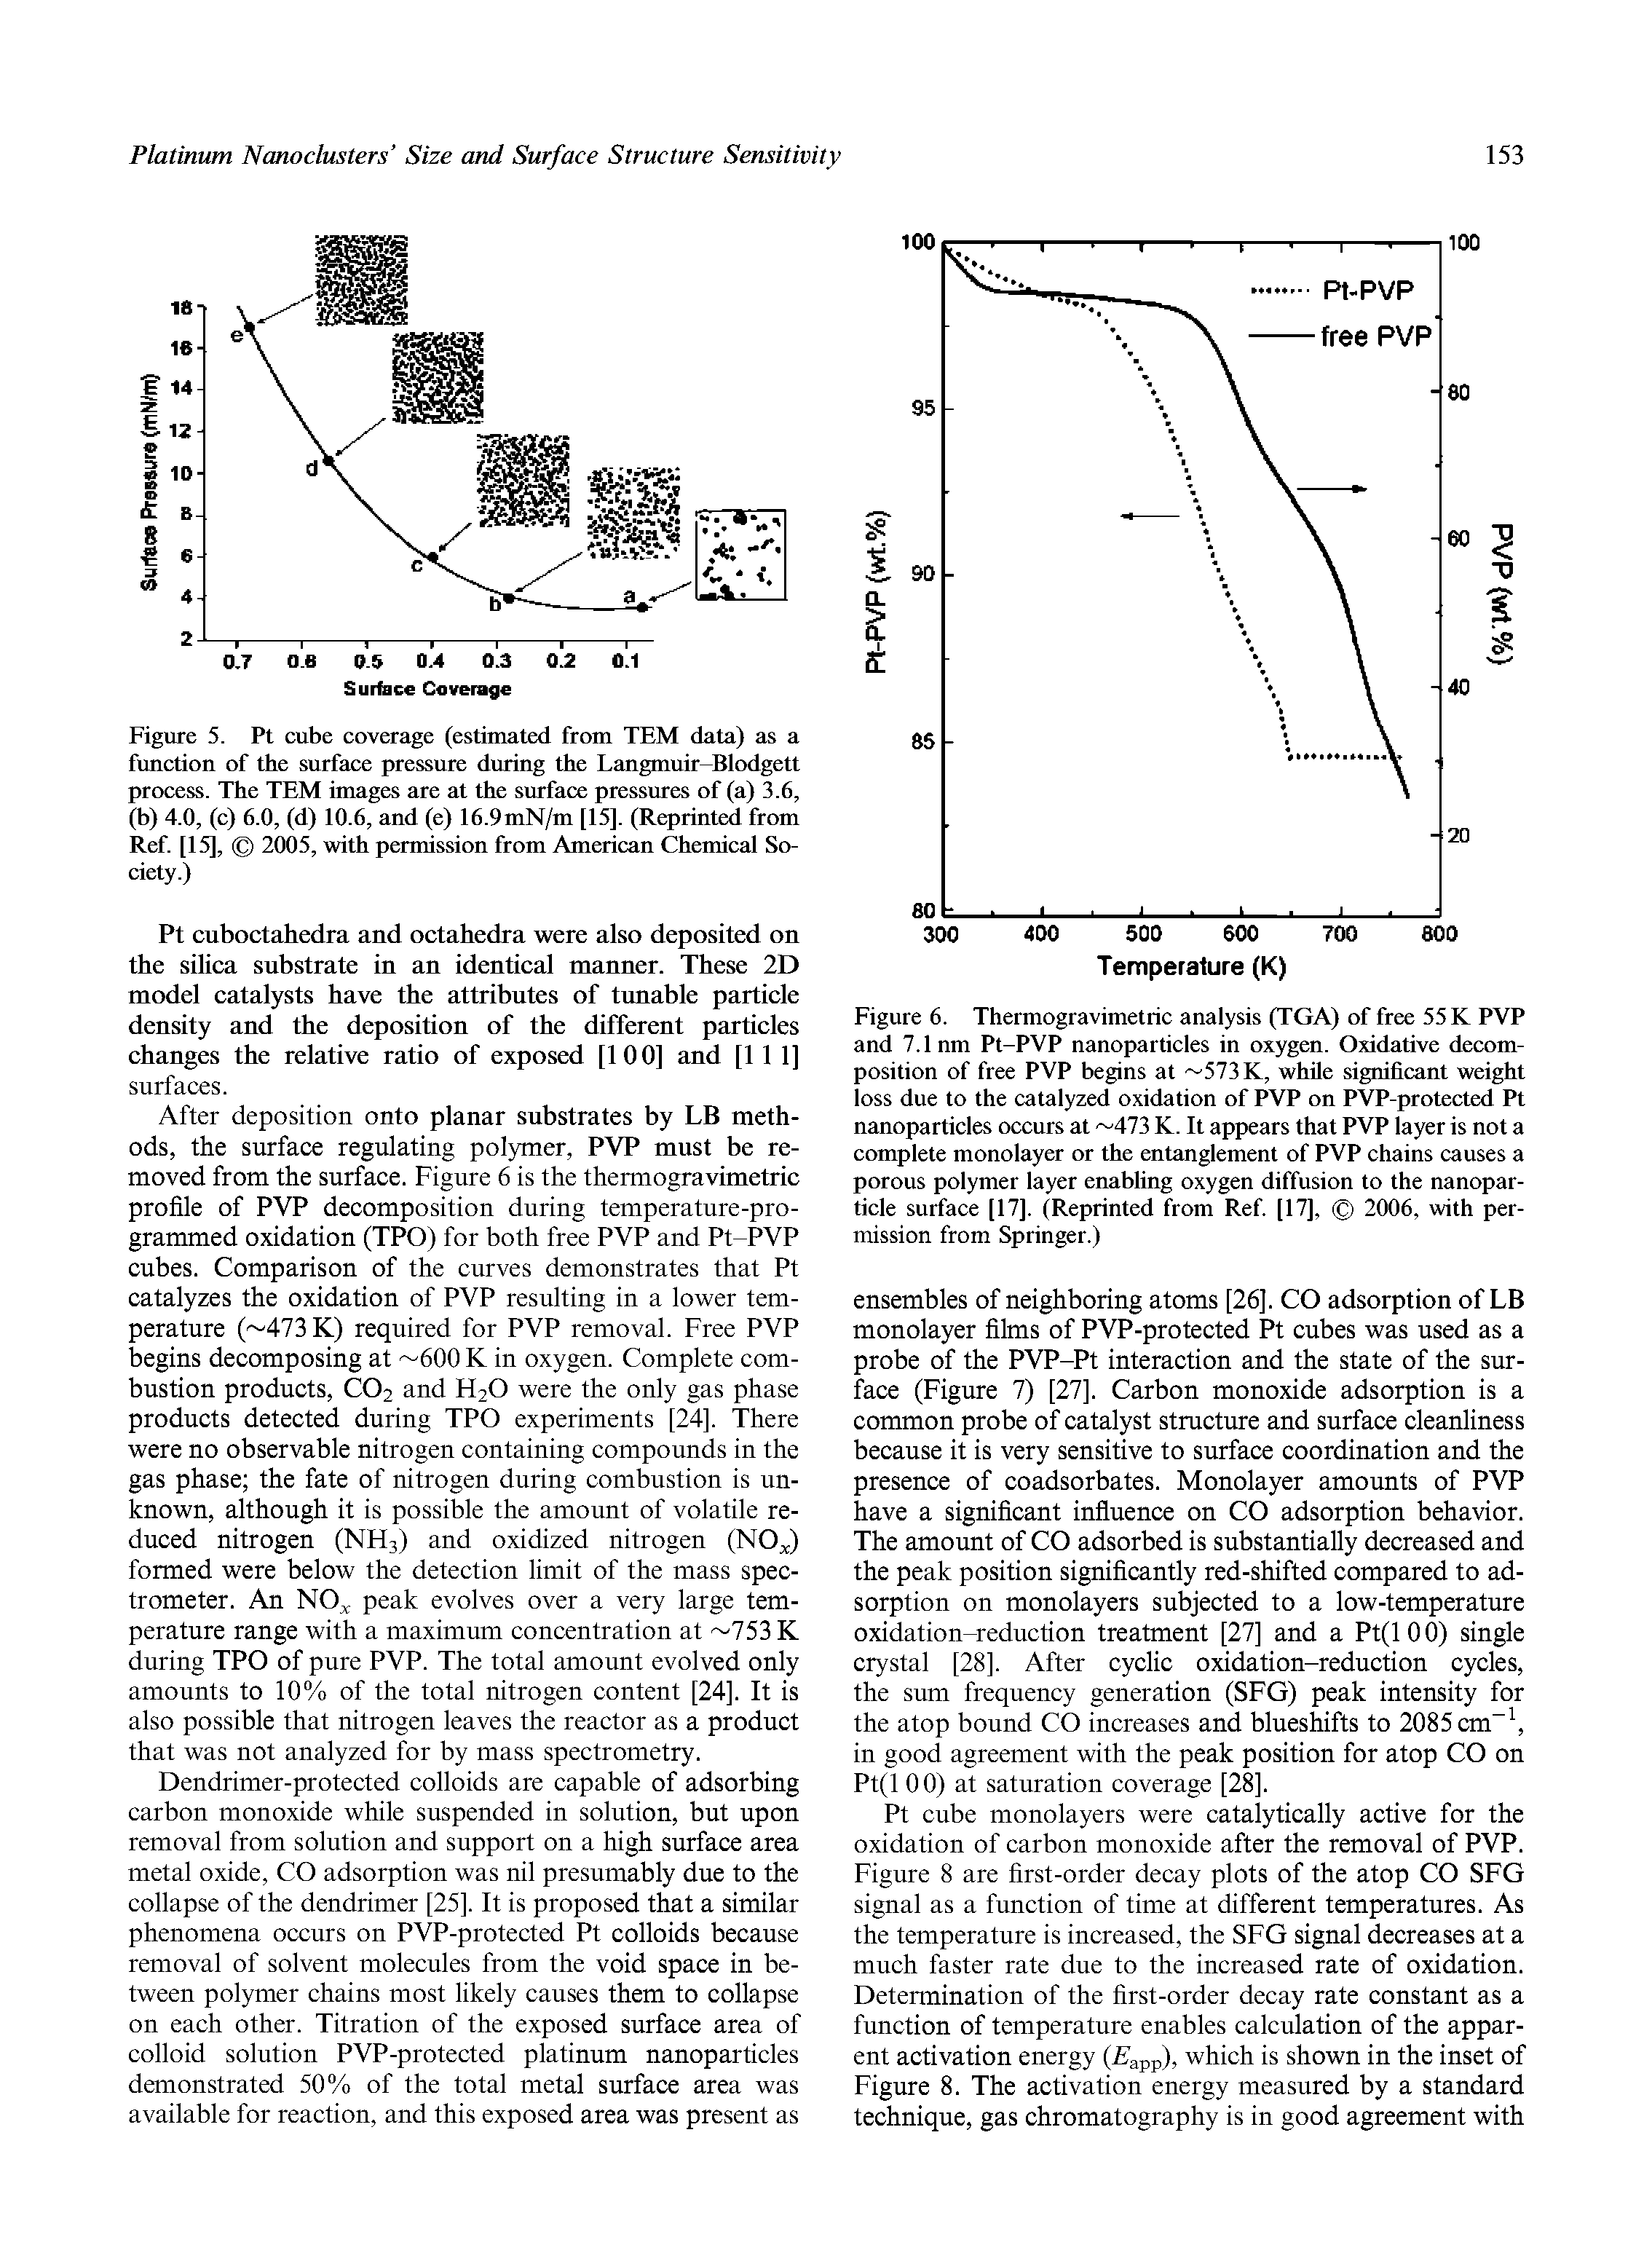 Figure 6. Thermogravimetric analysis (TGA) of free 55 K PVP and 7.1 nm Pt-PVP nanoparticles in oxygen. Oxidative decomposition of free PVP begins at 573K, while significant weight loss due to the catalyzed oxidation of PVP on PVP-protected Pt nanoparticles occurs at 473 K. It appears that PVP layer is not a complete monolayer or the entanglement of PVP chains causes a porous polymer layer enabling oxygen diffusion to the nanoparticle surface [17]. (Reprinted from Ref [17], 2006, with permission from Springer.)...